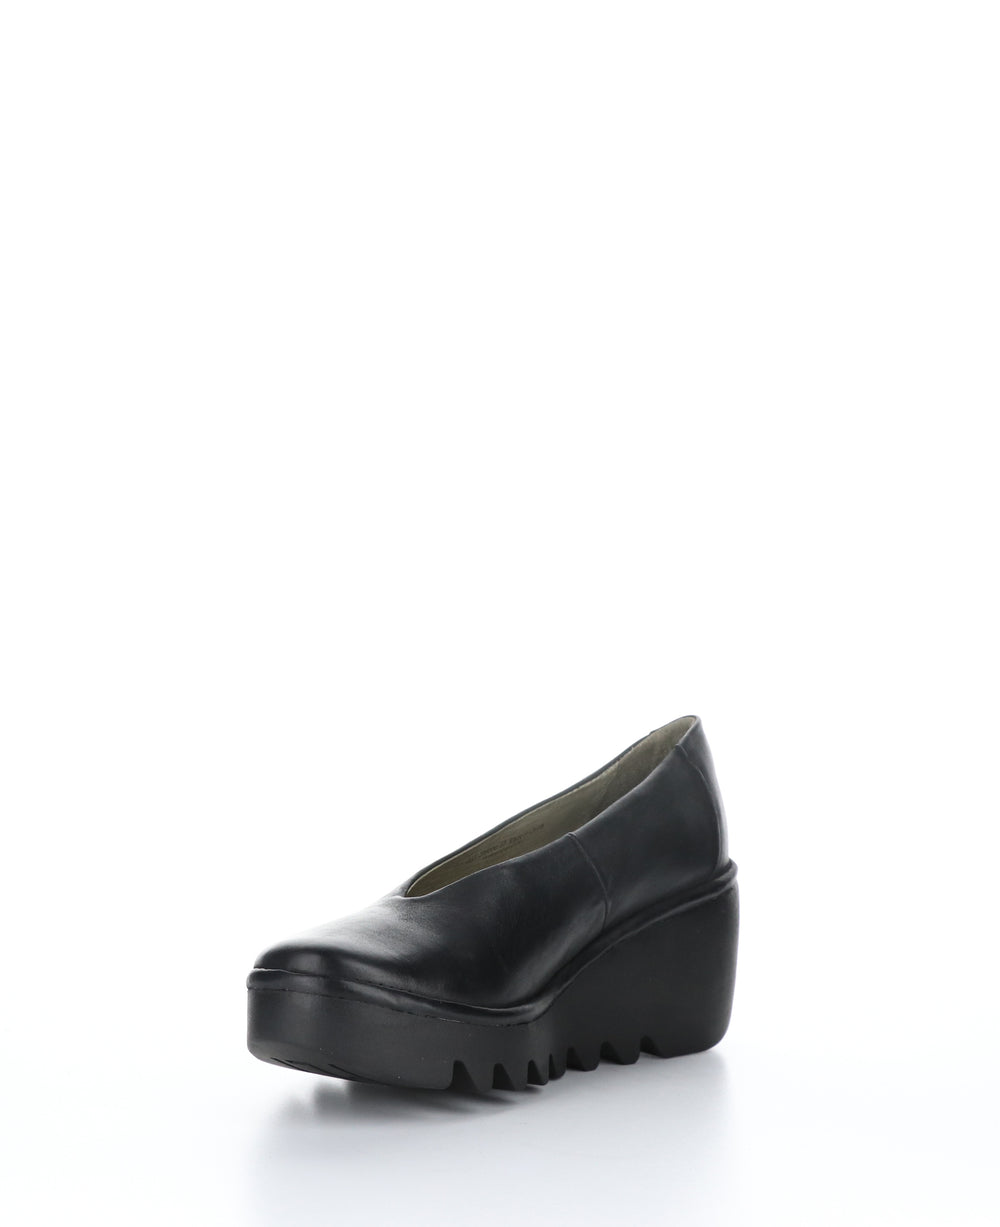 BESO246FLY Verona Black Wedge Shoes